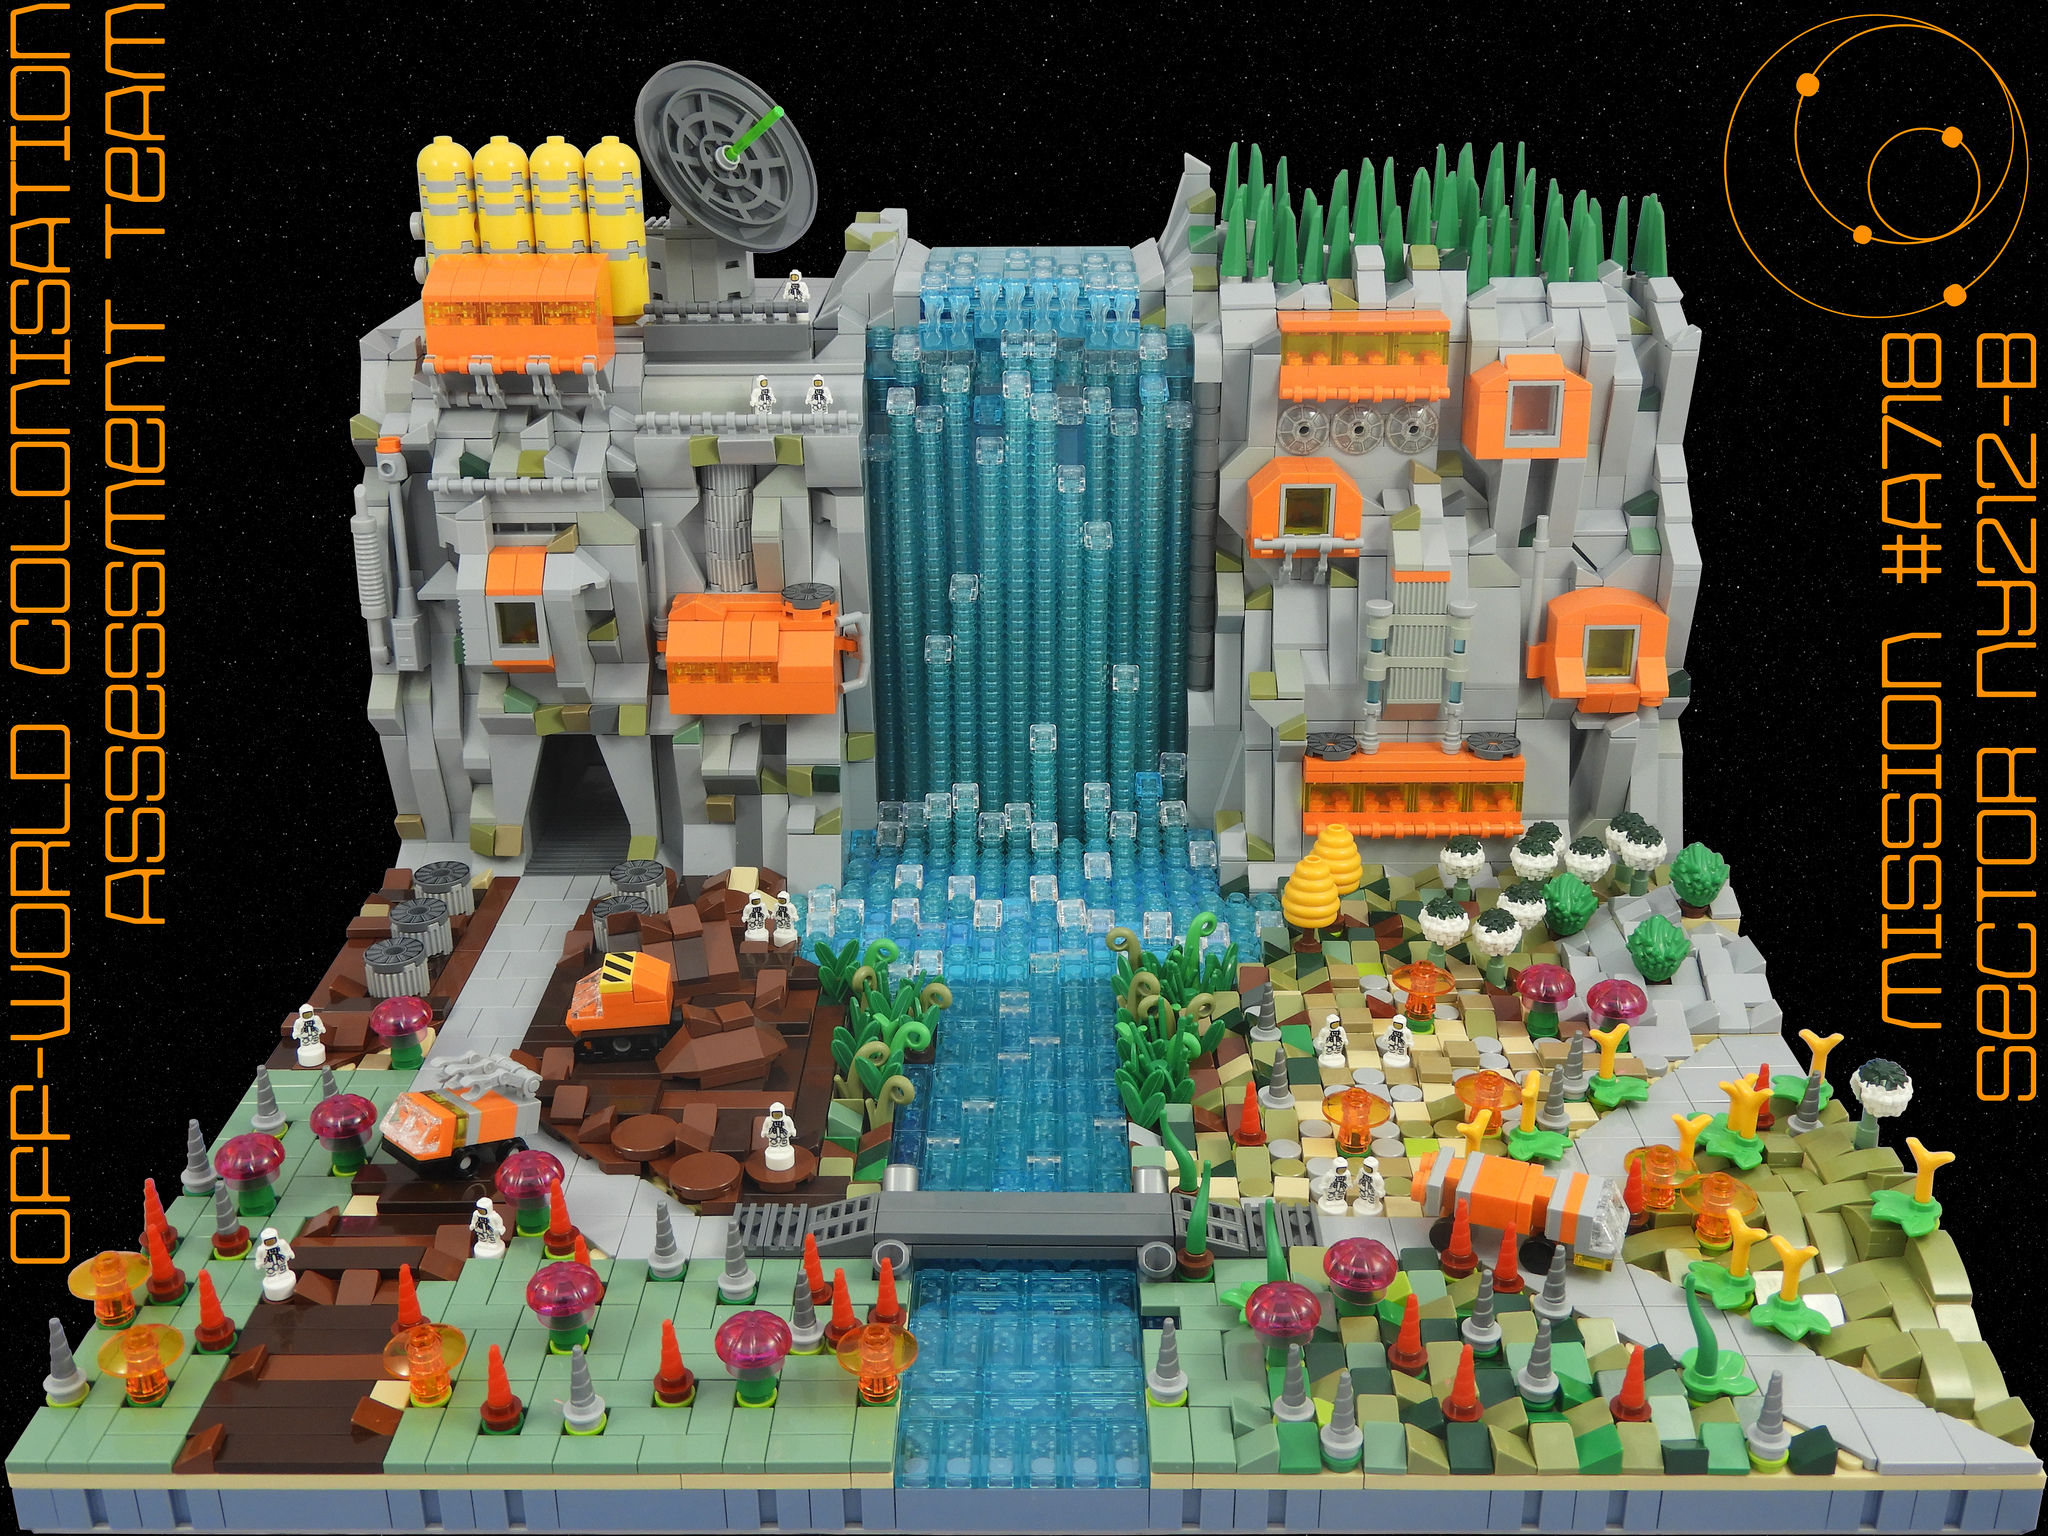 Epic Build In A Micro Scale - BrickNerd - All things LEGO and the LEGO fan  community